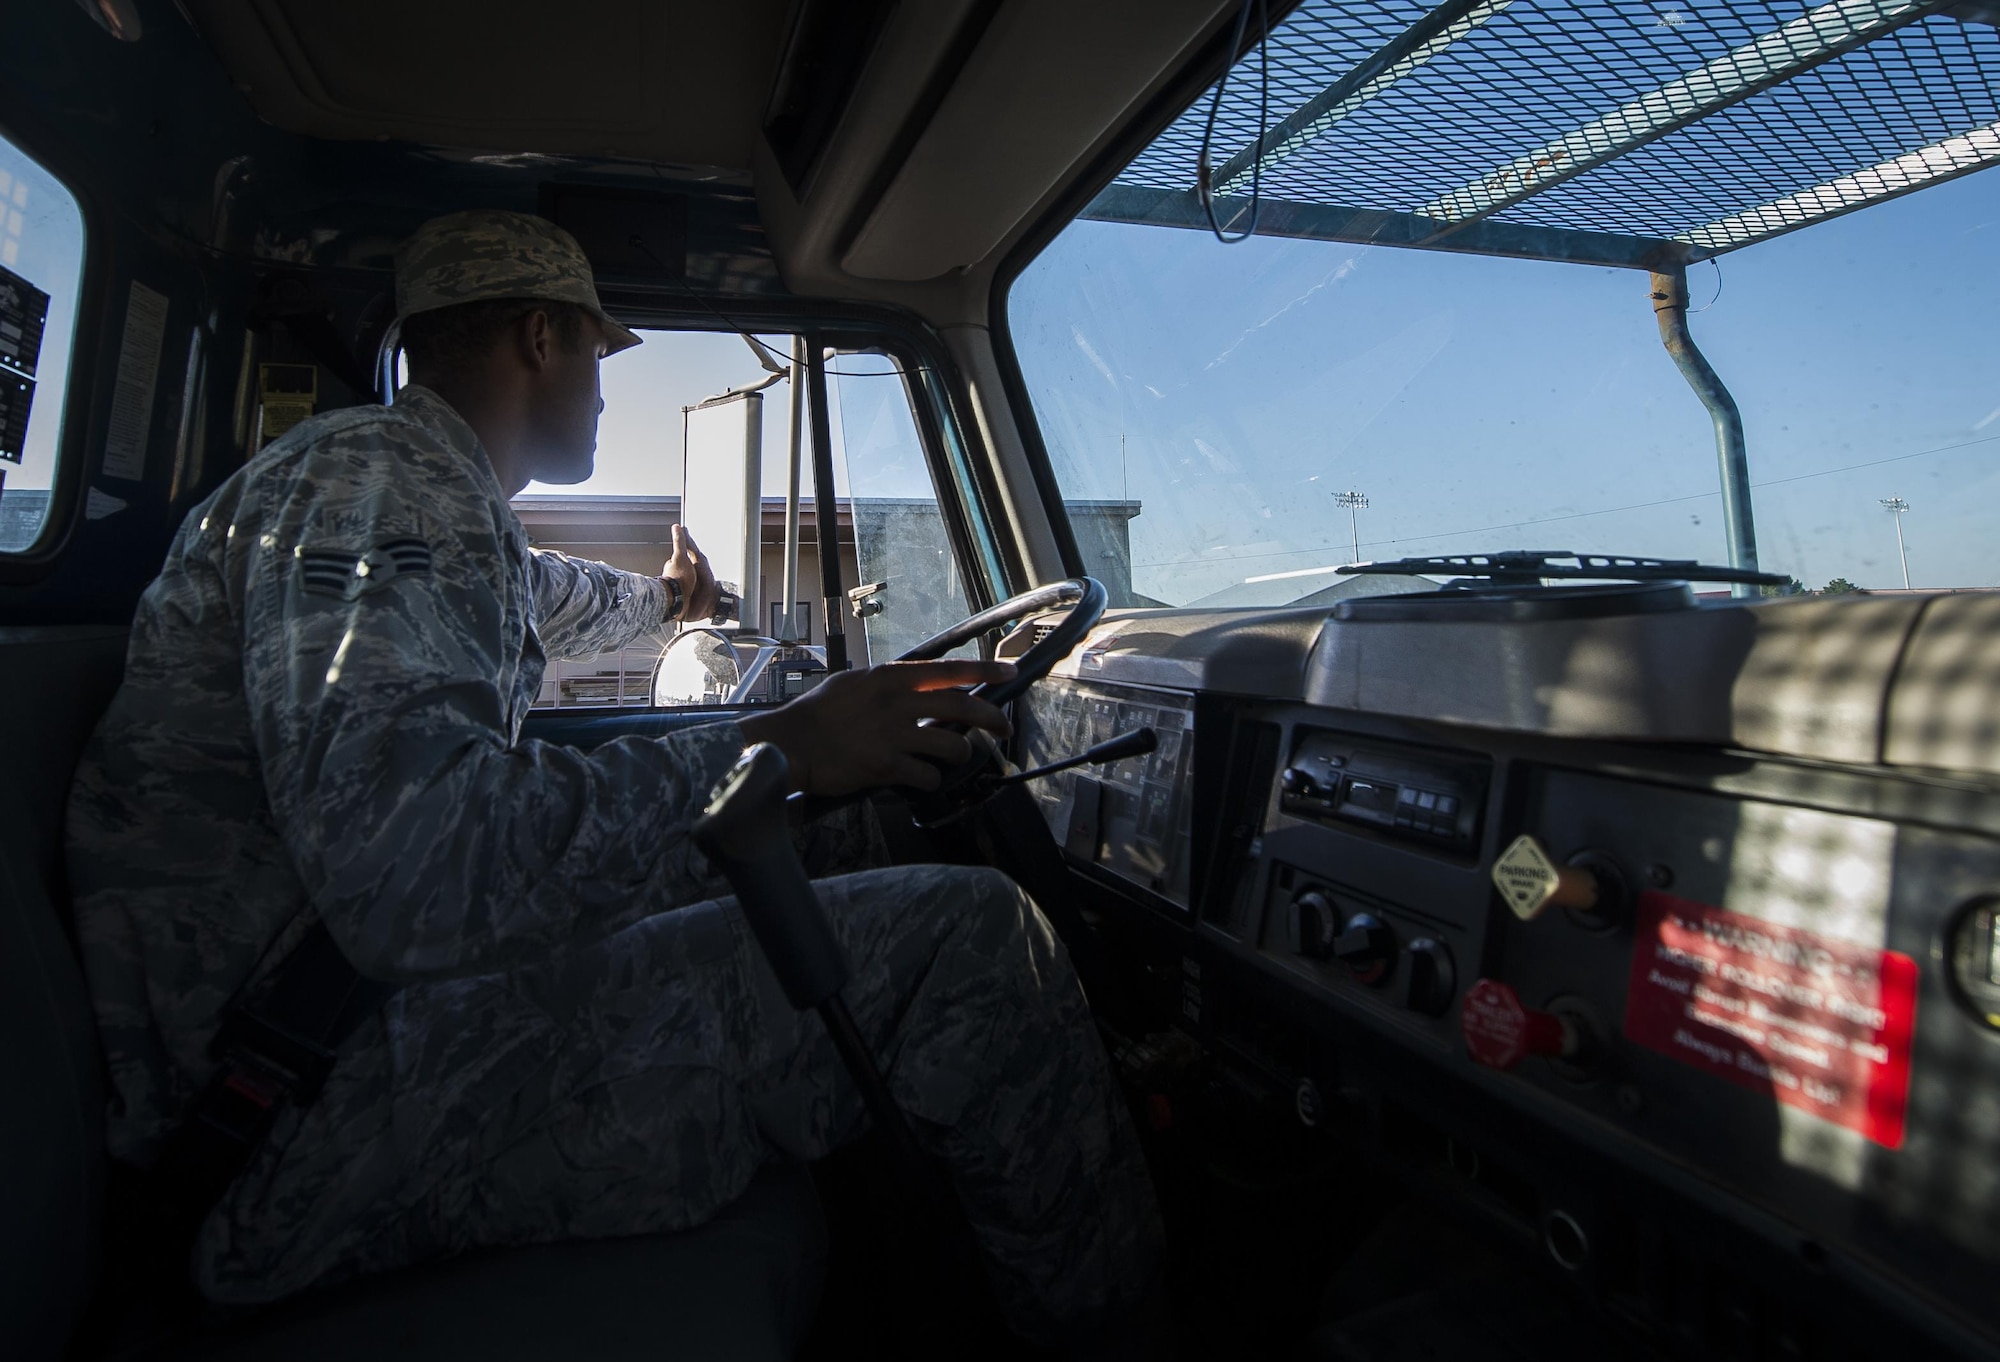 Senior Airman Darren Pizarro, 27th Special Operations Civil Engineer Squadron electrical systems specialist, drives his work truck to the next work site at Cannon Air Force Base, N.M., June 27, 2017. Pizarro and his peers at the base electrical shop have already handled over 600 requests this year. (U.S. Air Force photo by Senior Airman Lane T. Plummer)